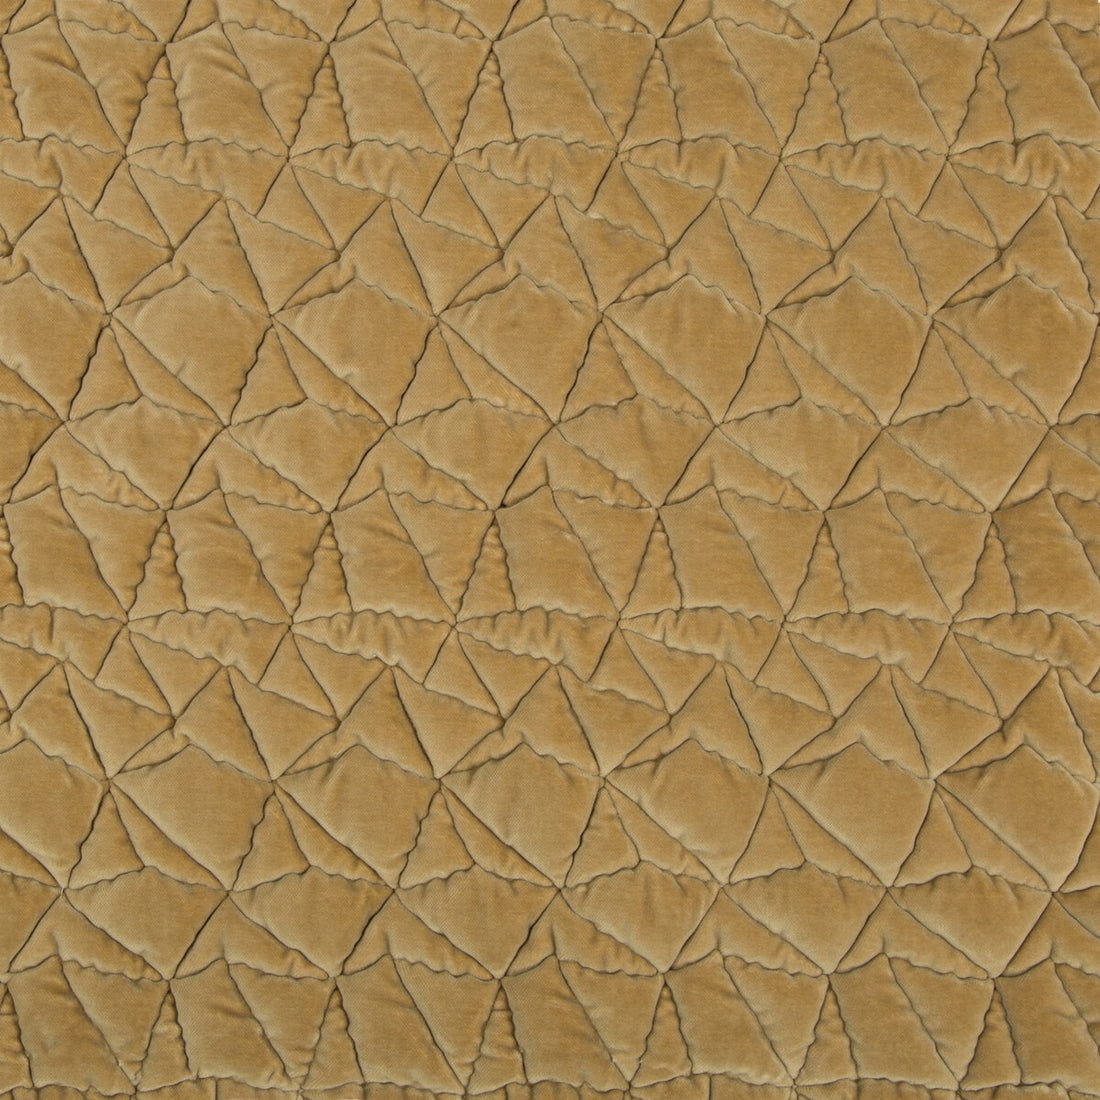 Taking Shape fabric in camel color - pattern 34922.16.0 - by Kravet Couture in the Modern Tailor collection